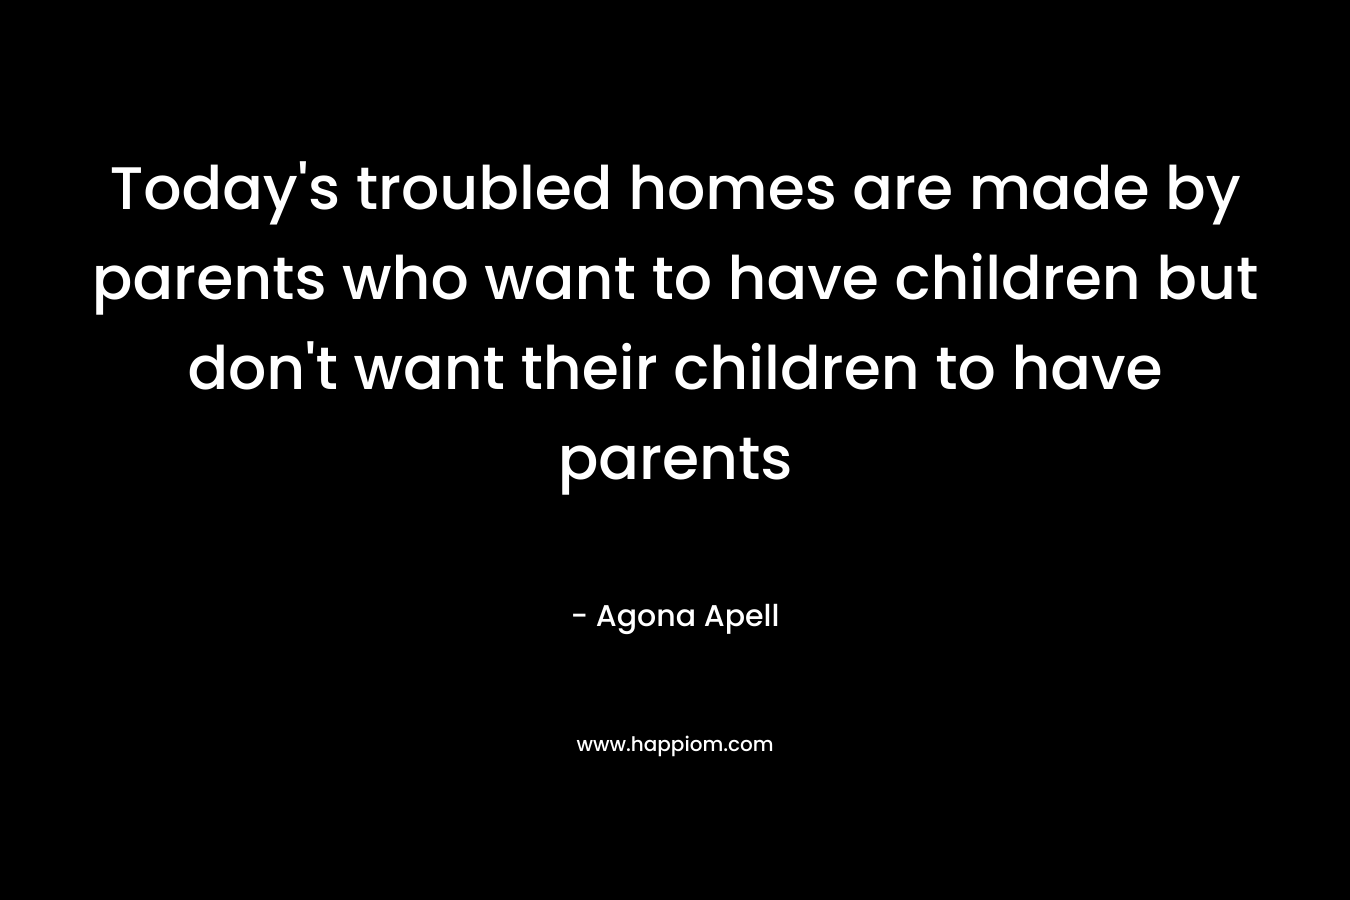 Today's troubled homes are made by parents who want to have children but don't want their children to have parents